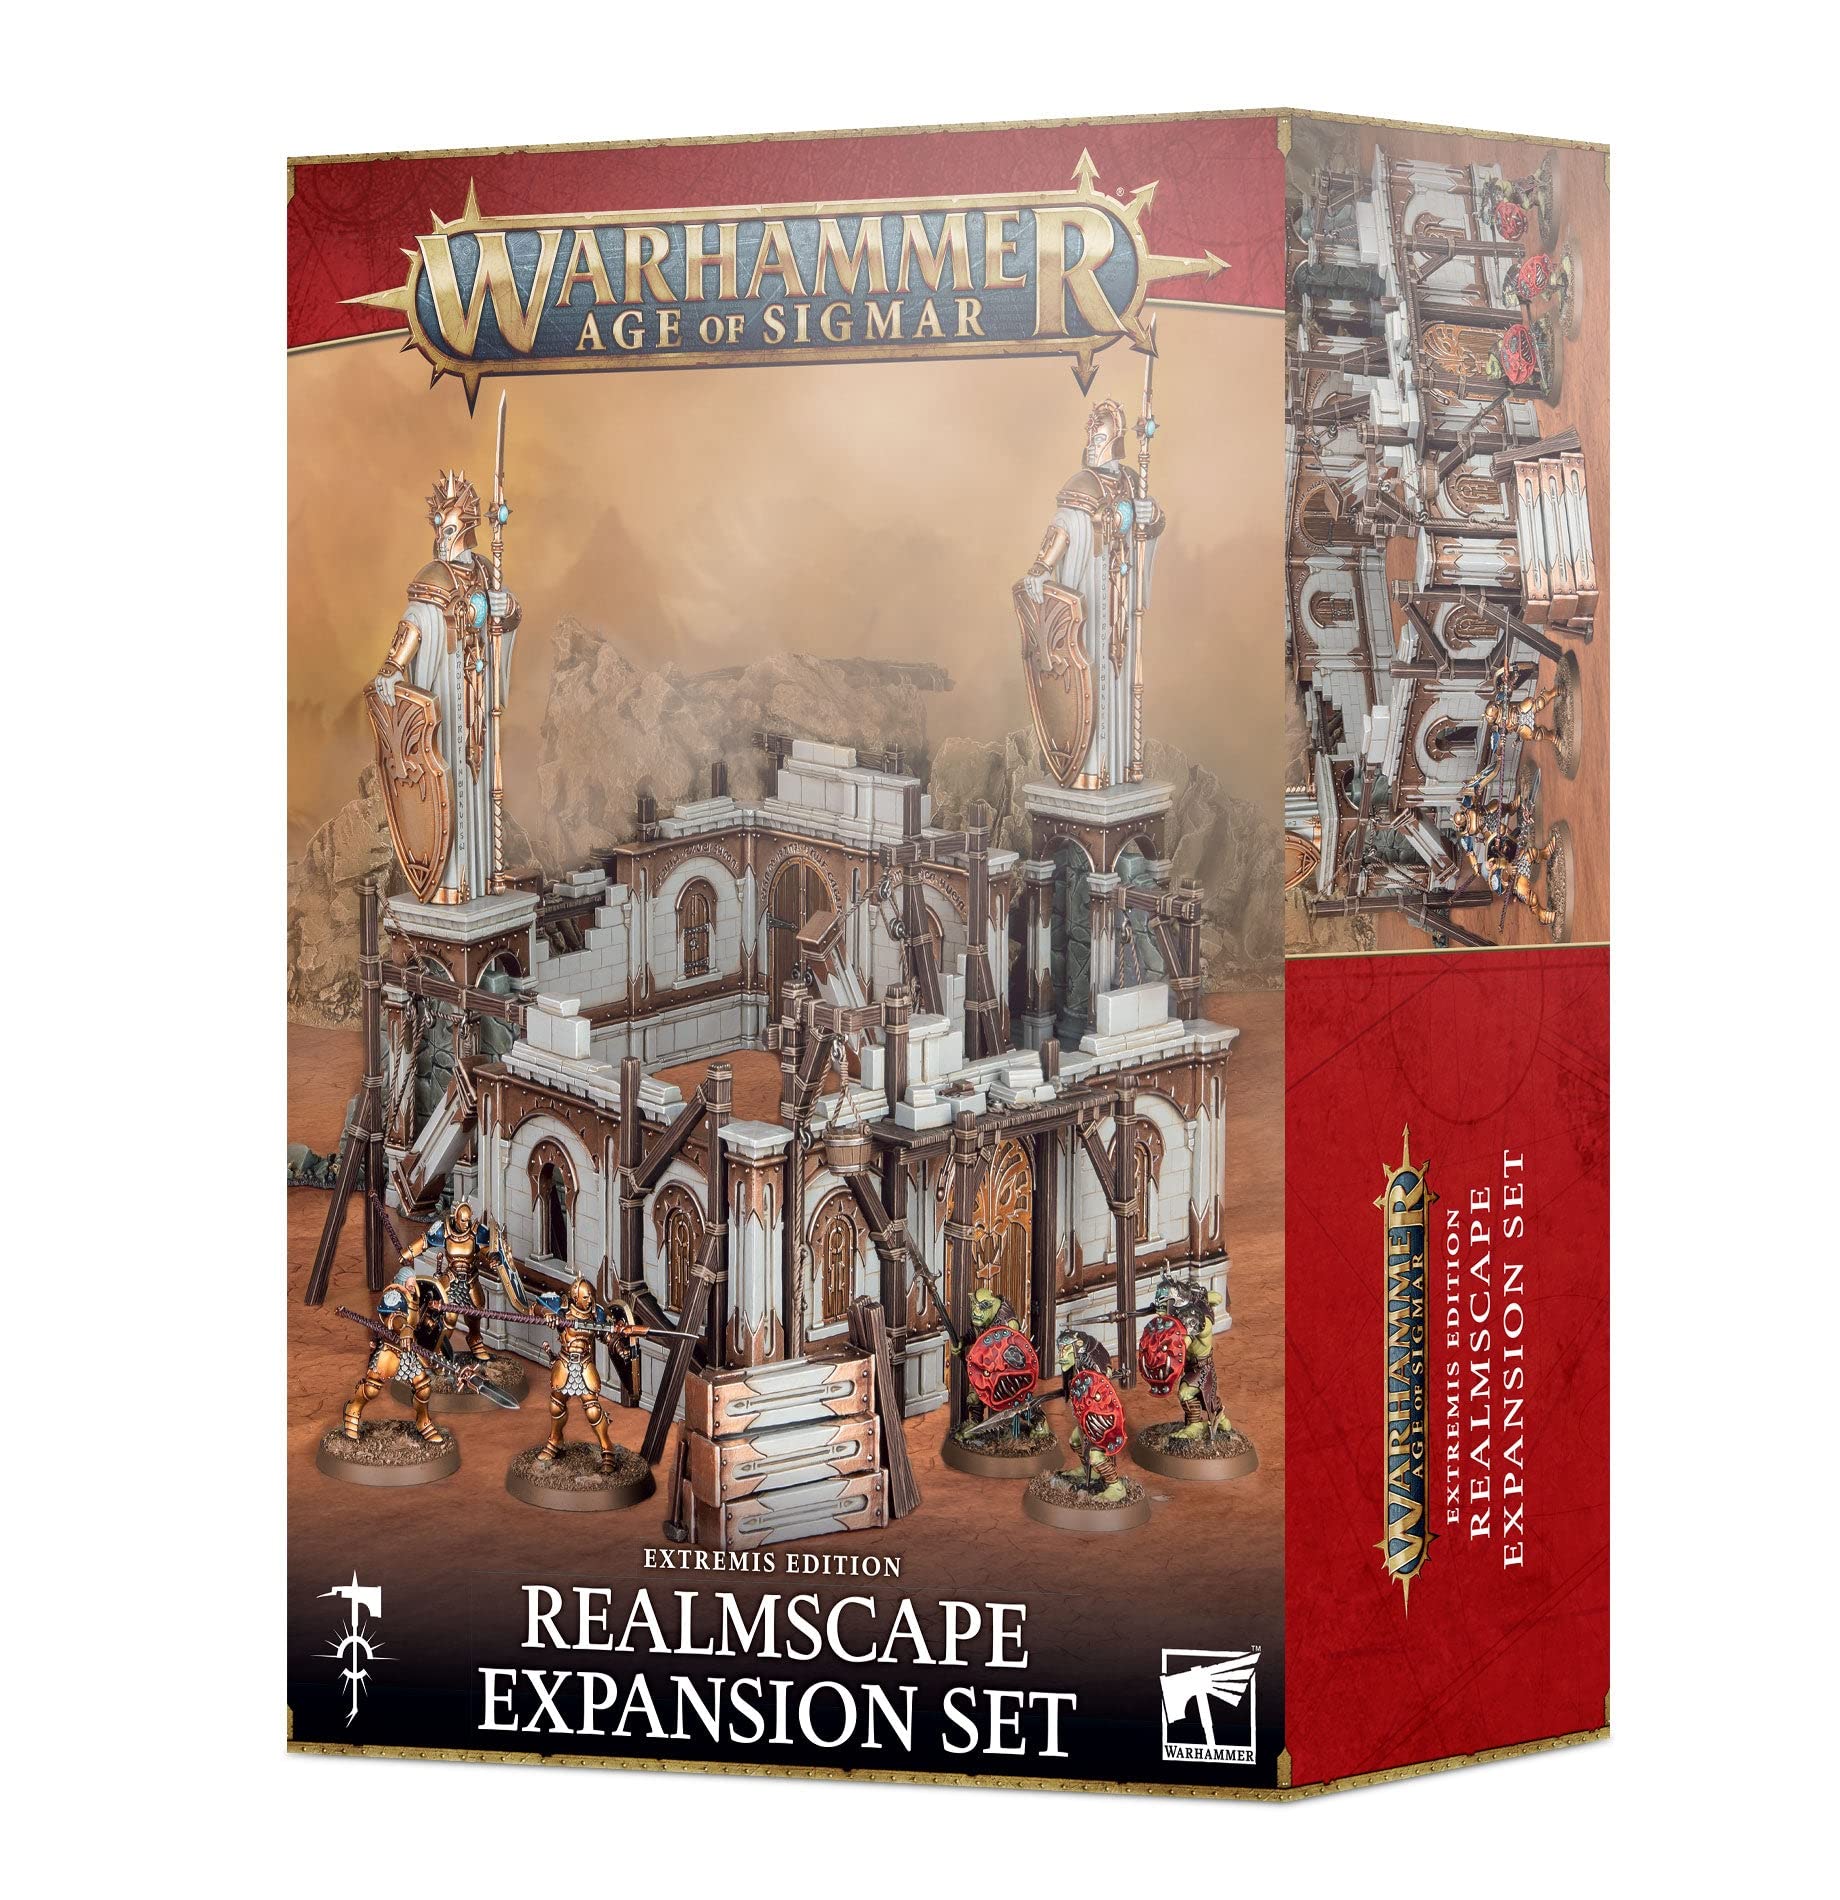 Warhammer Age of Sigmar - Extremis Edition Realmscape Expansion Set